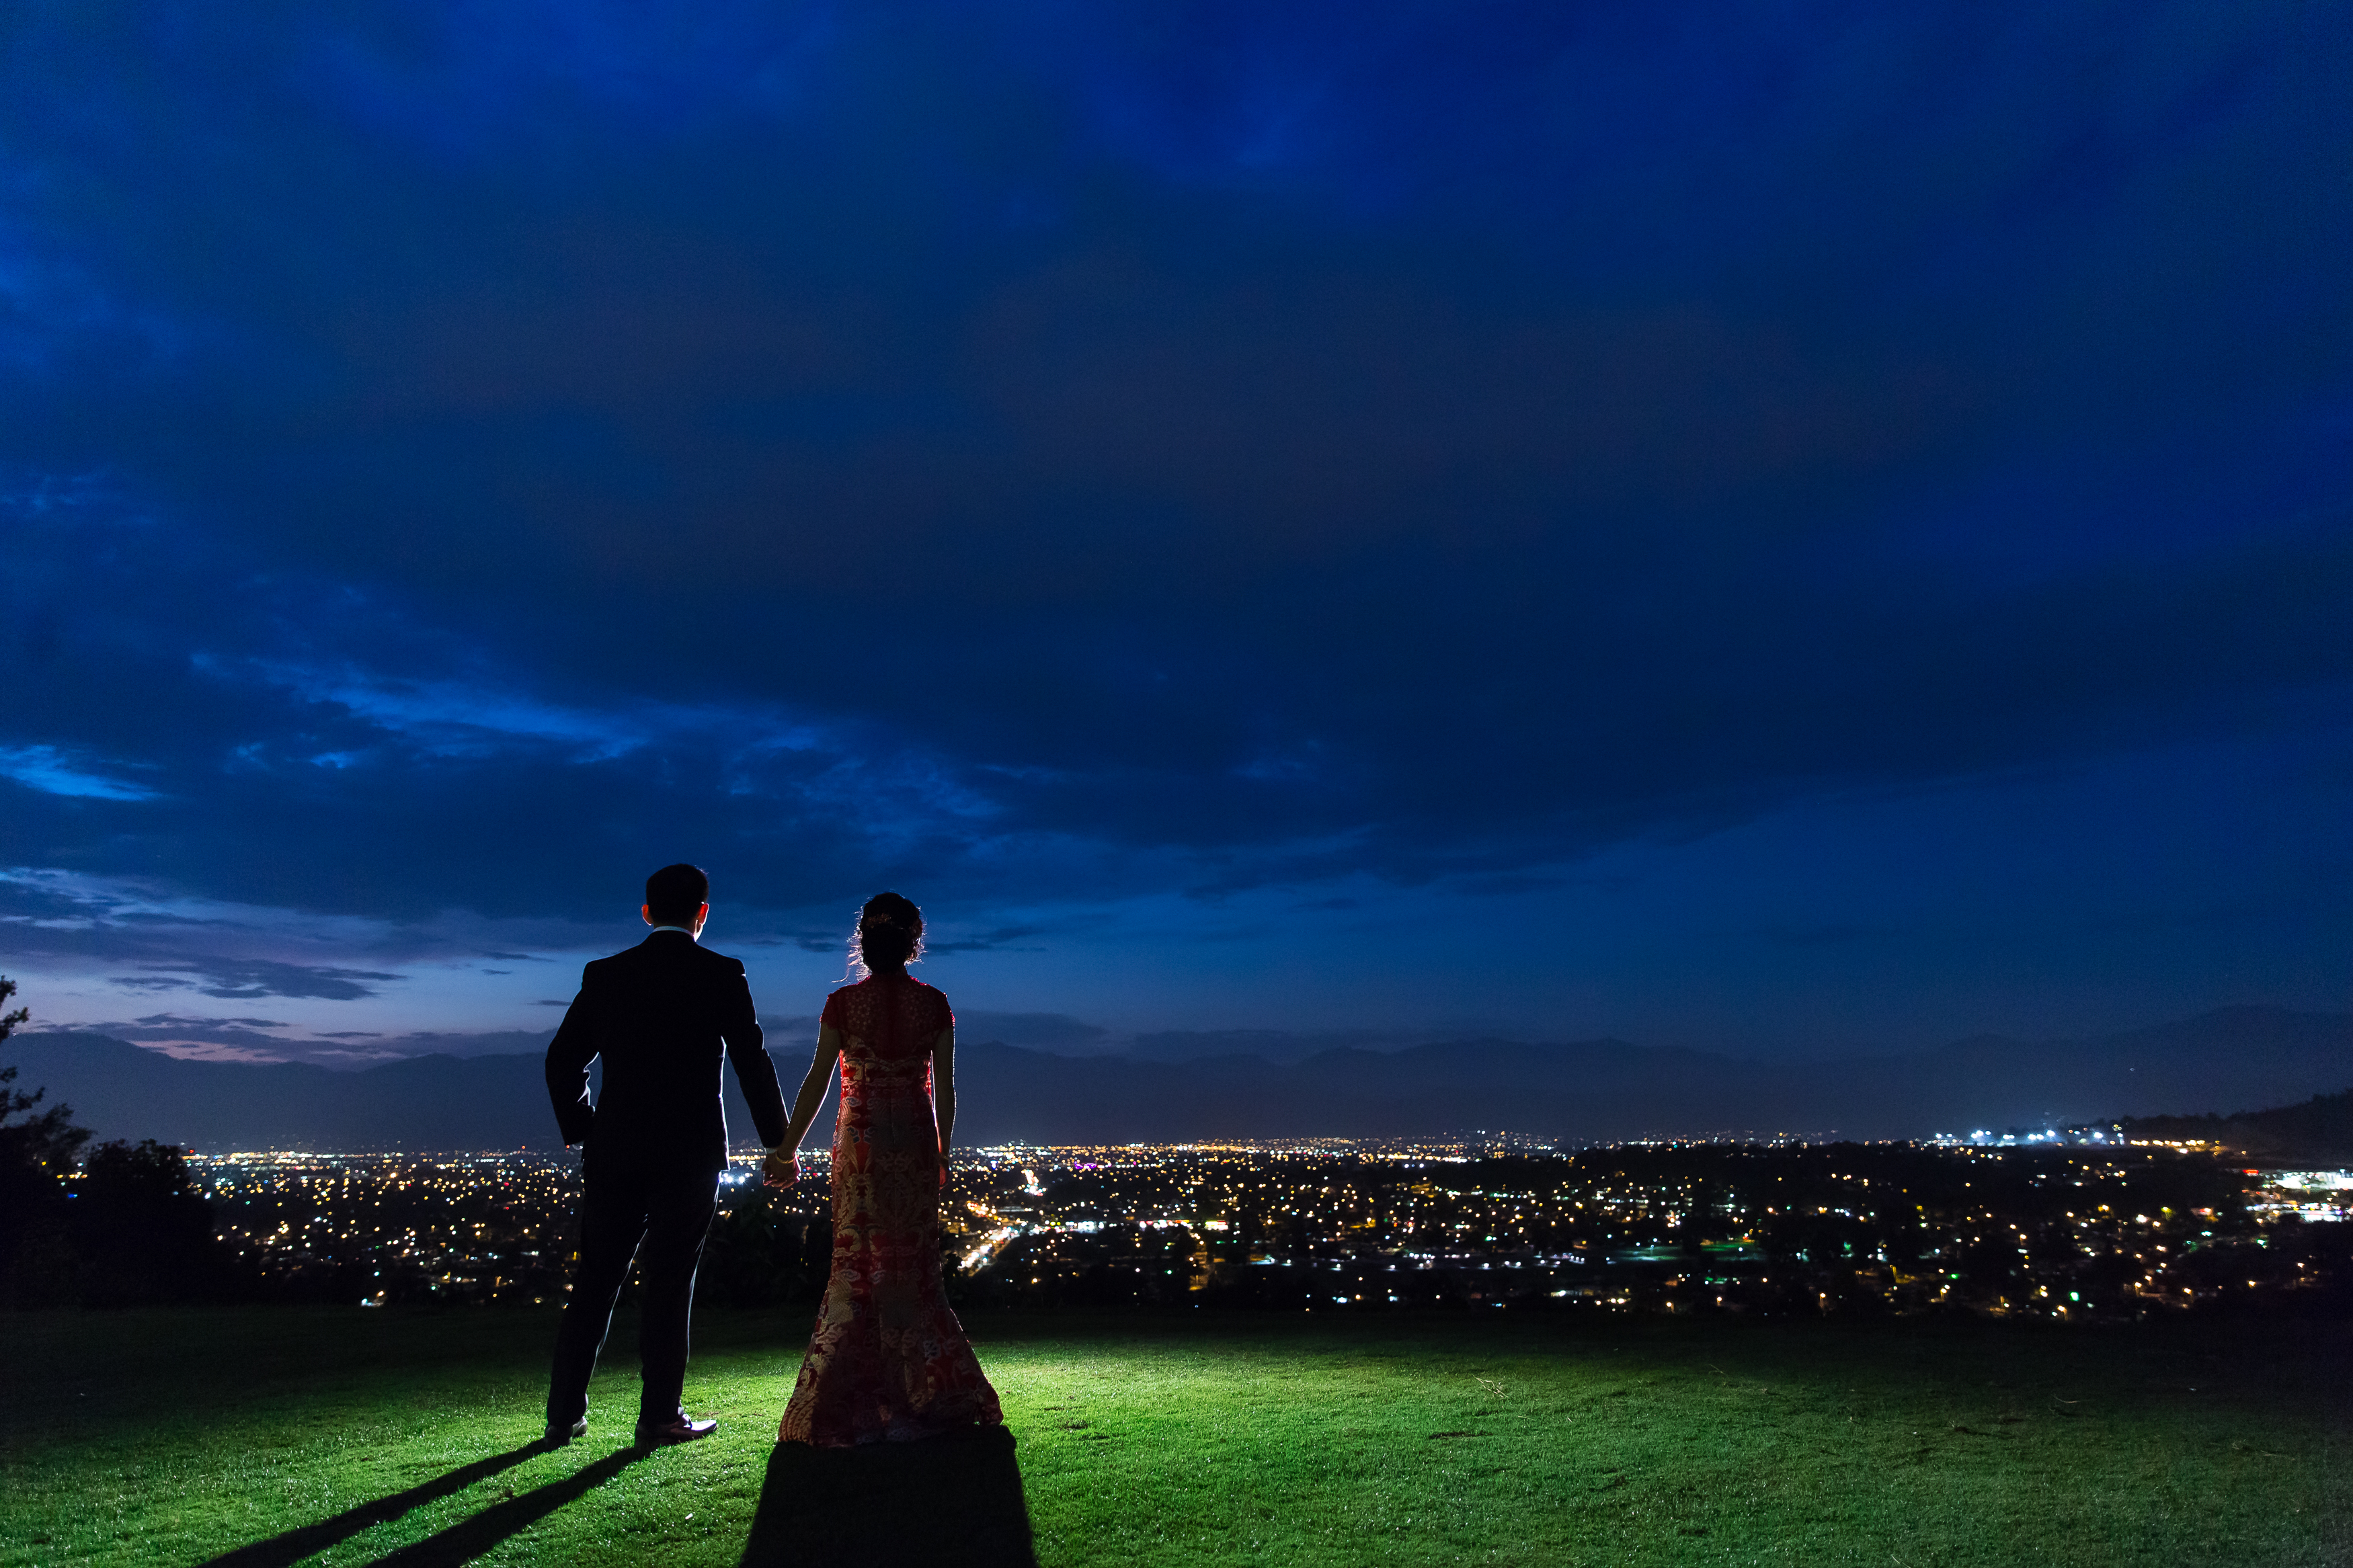 Couple standing on grass hill looking out over city at nighttime